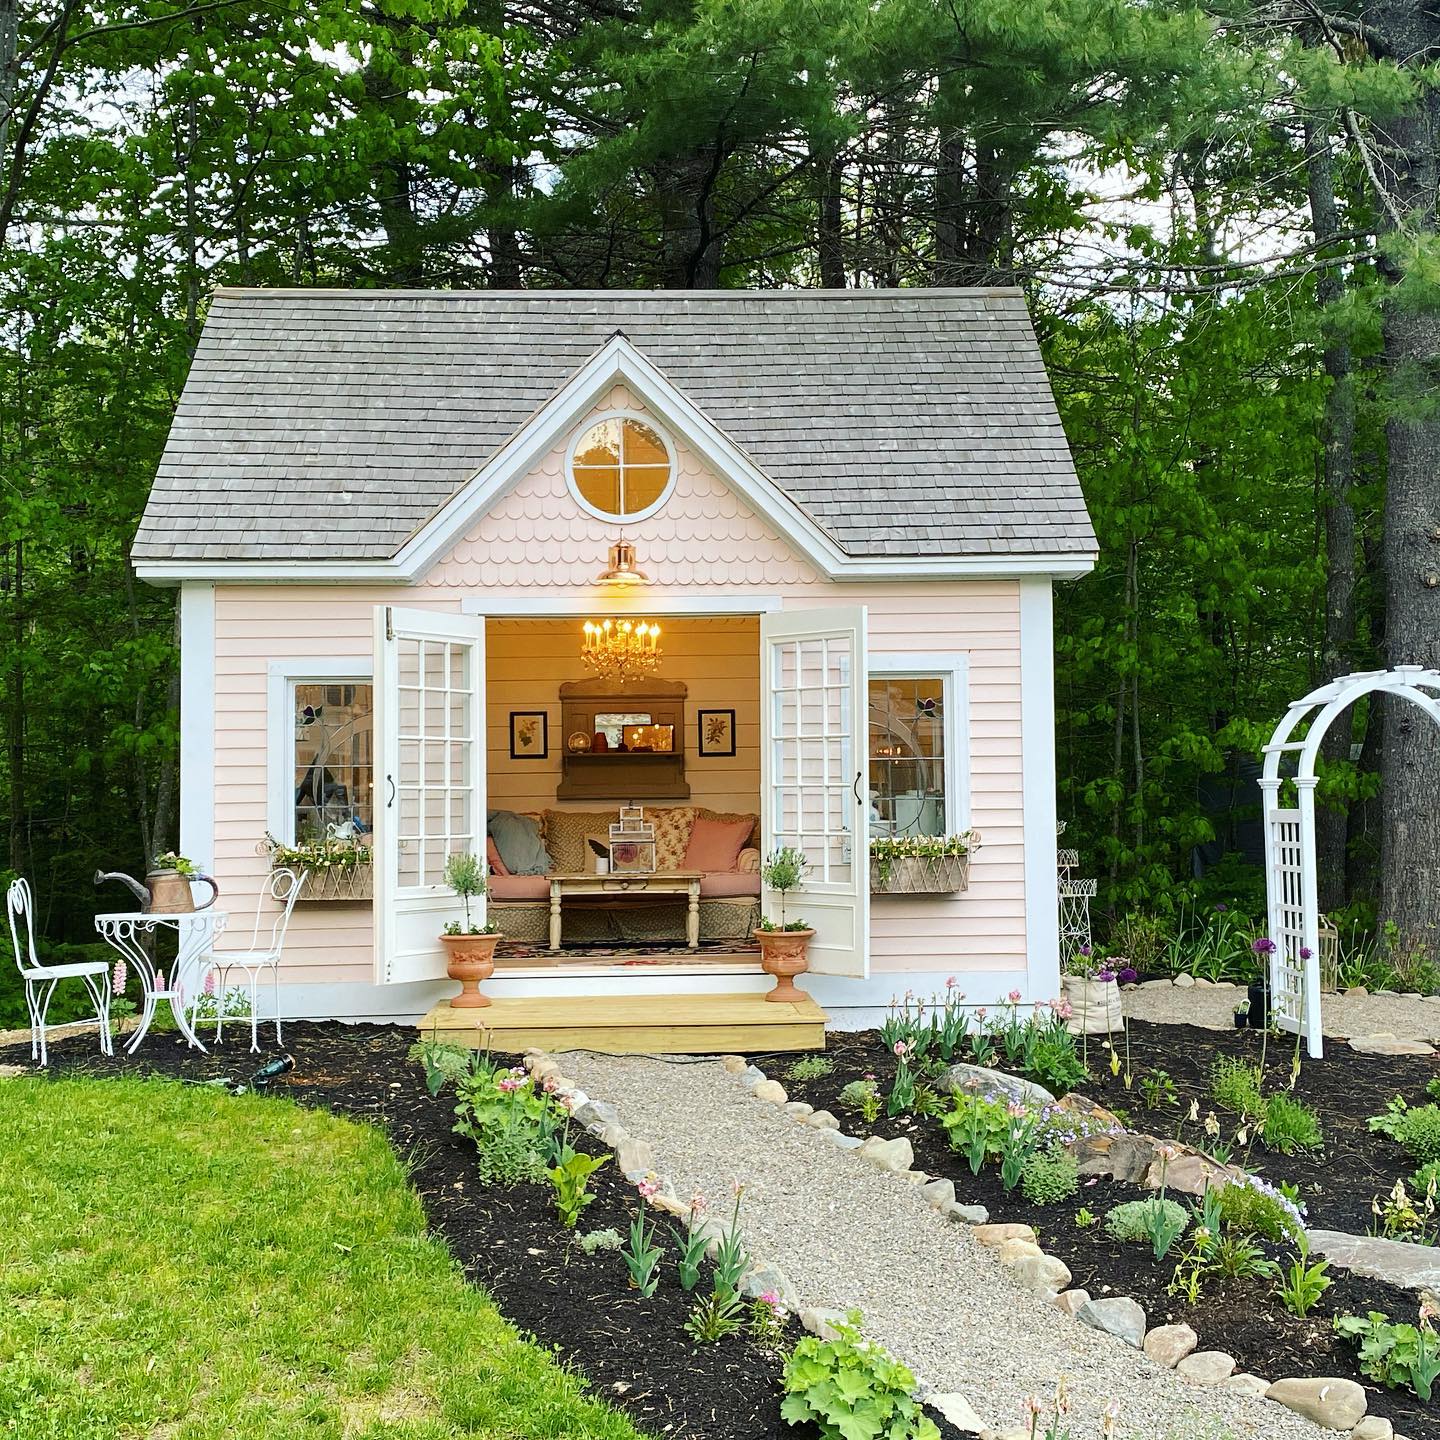 A peach cottage located in the backyard. Photo by Instagram user @clark.cottage.gardens